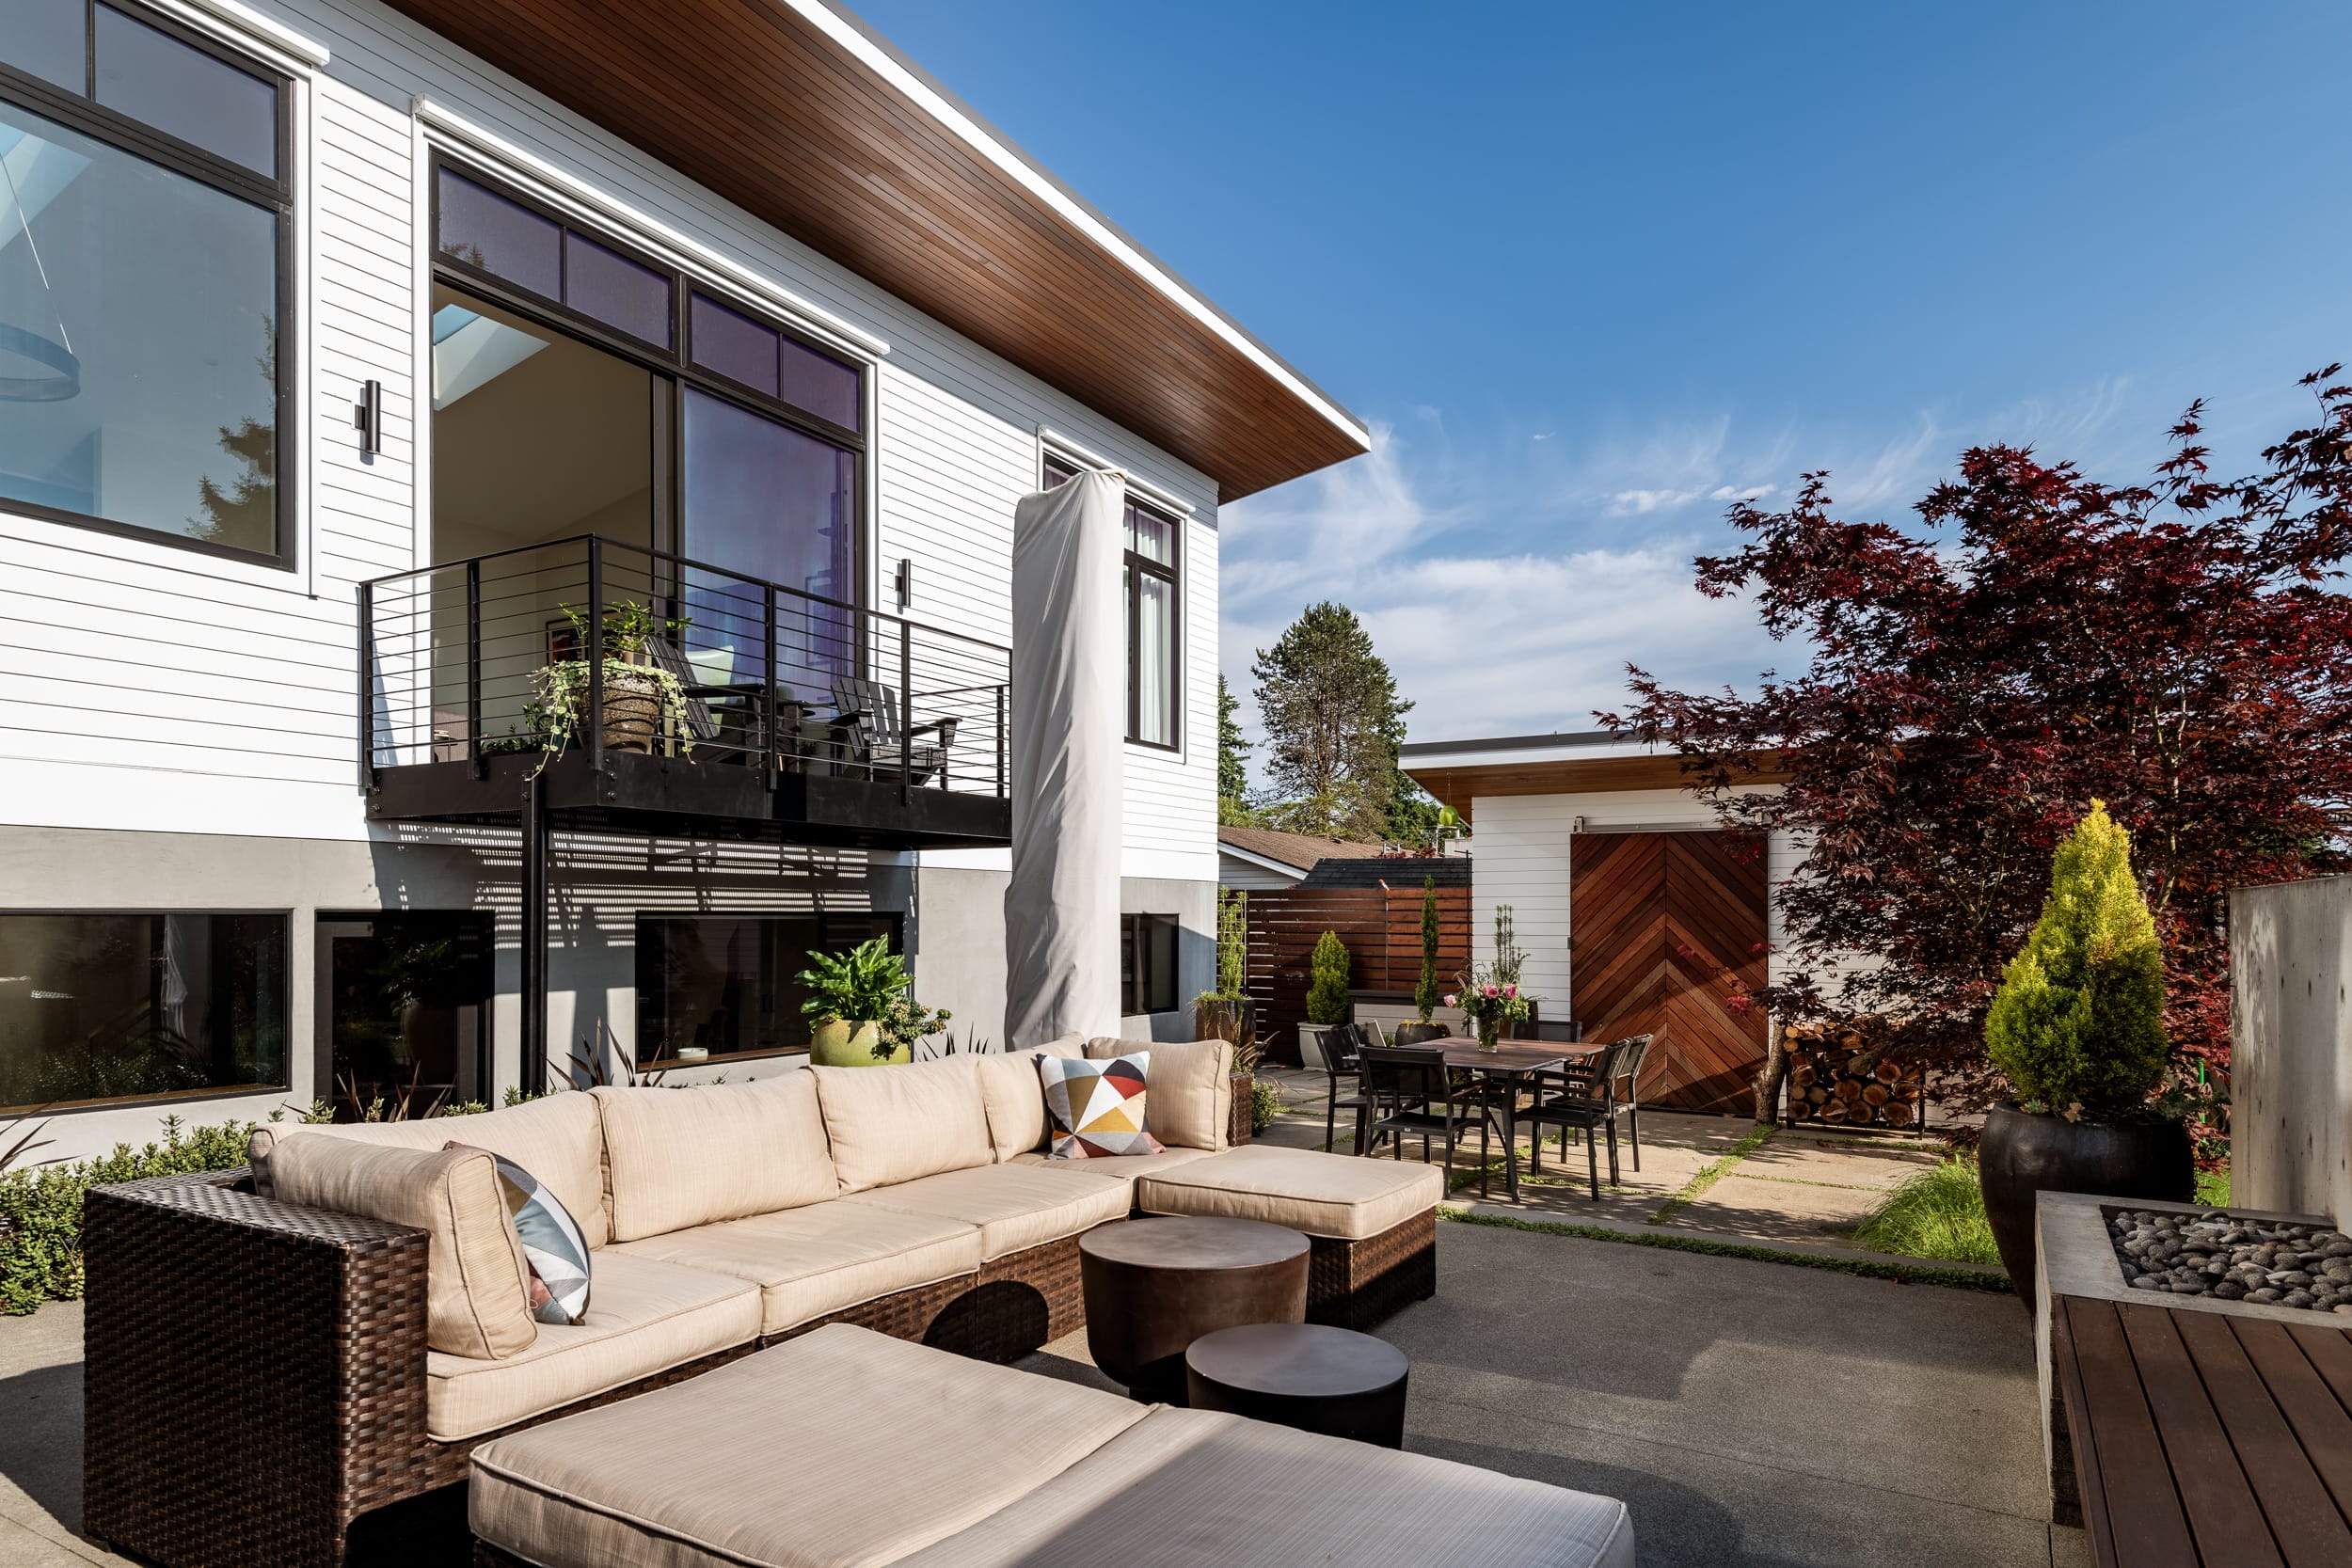 A modern home with a patio and outdoor furniture.